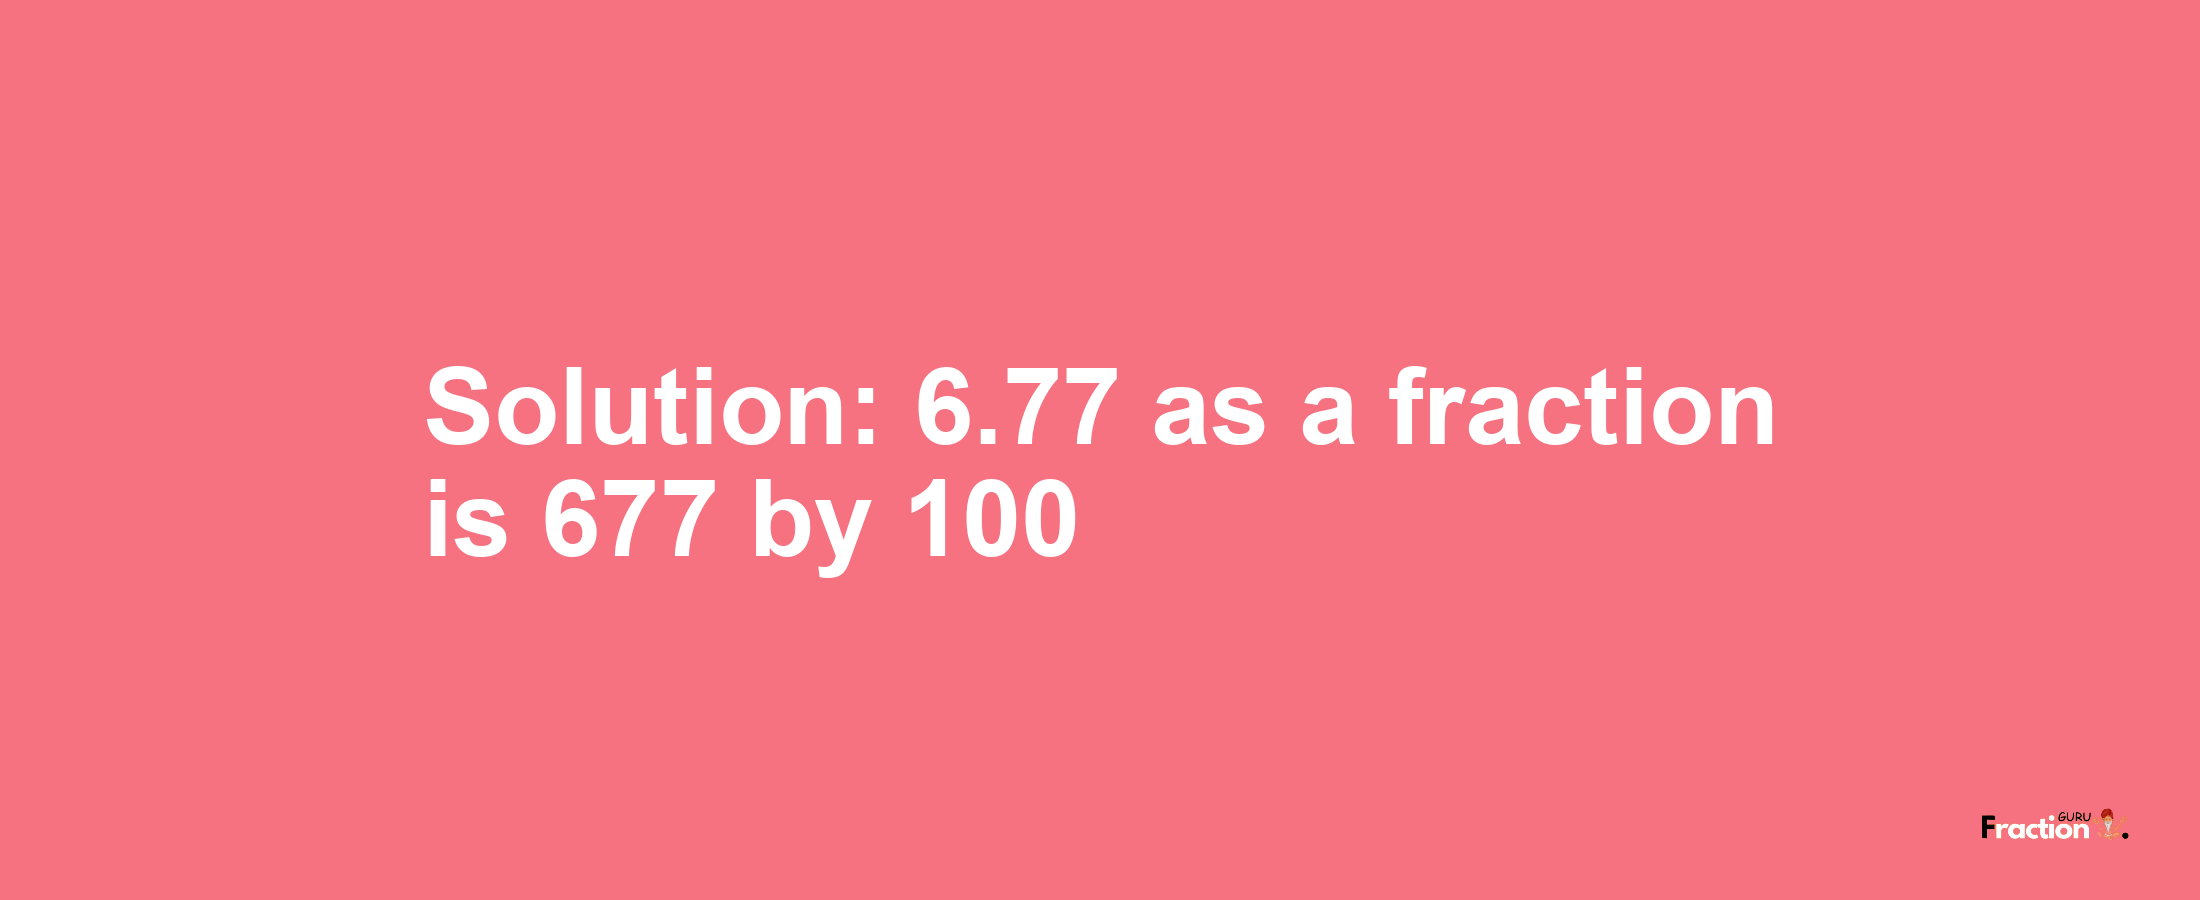 Solution:6.77 as a fraction is 677/100